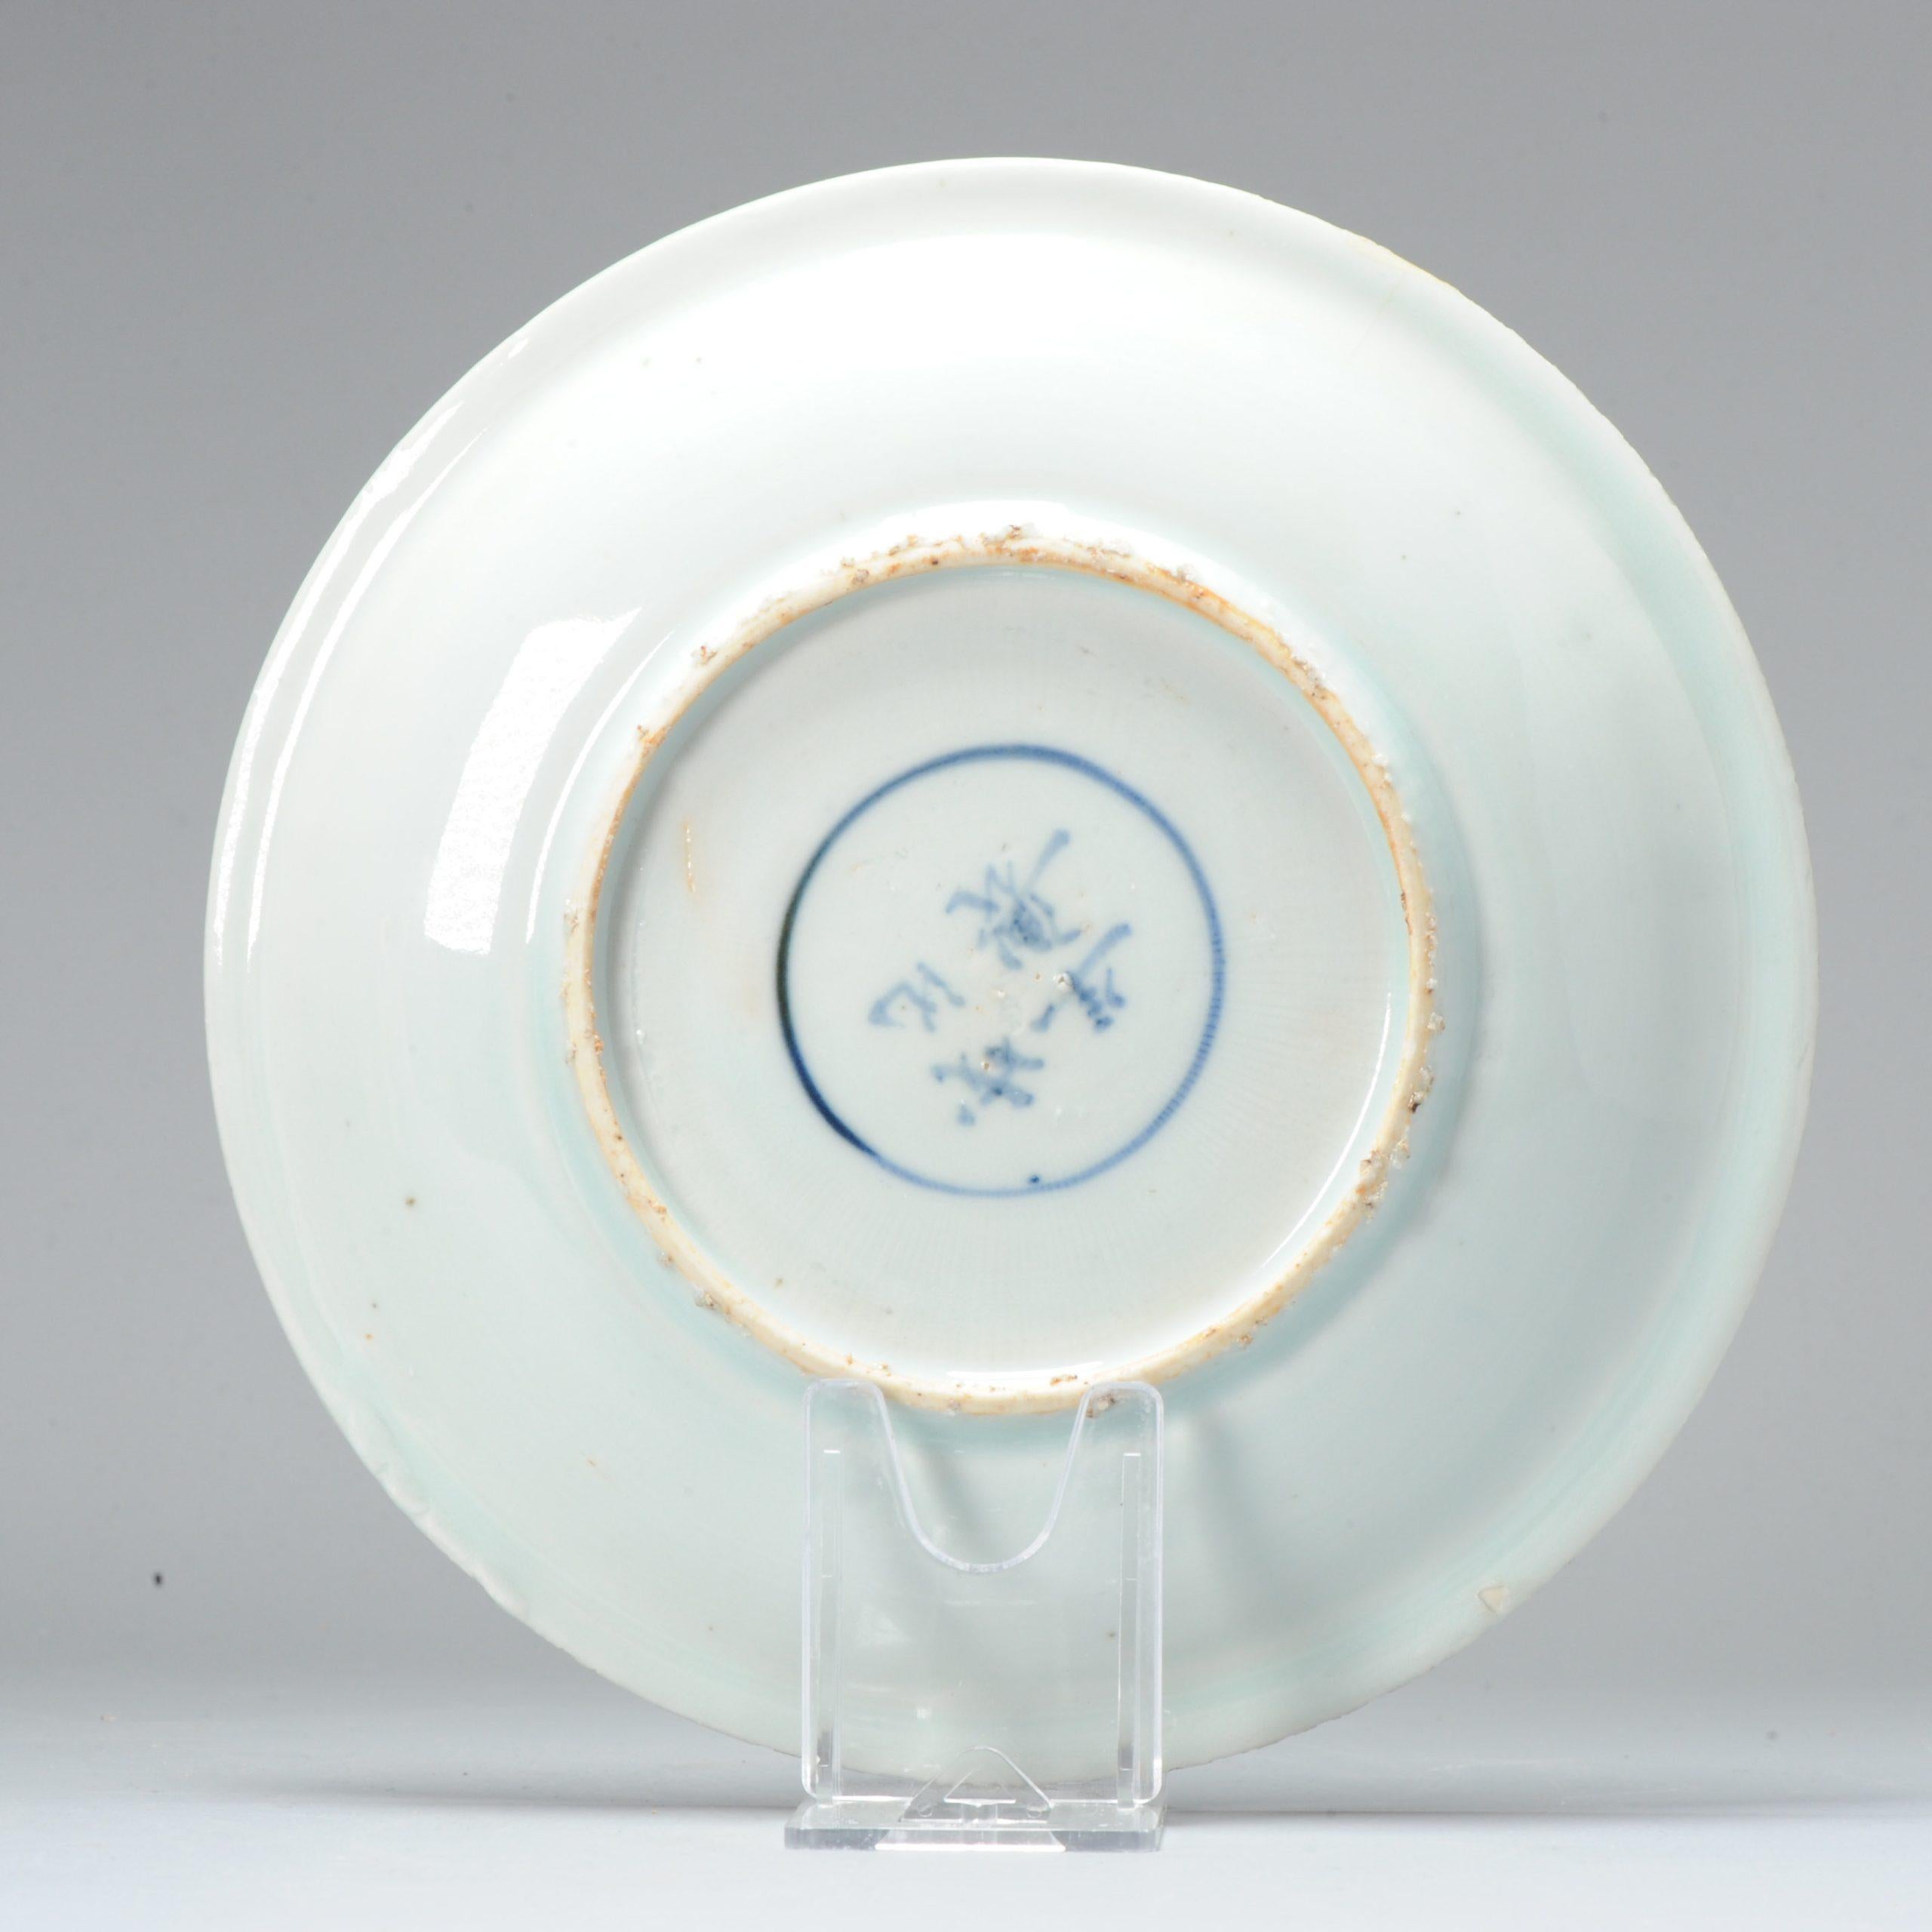 Rare Chinese Porcelain Ming Period Kosometsuke Plate Arhat, ca 1600-1640 In Excellent Condition For Sale In Amsterdam, Noord Holland